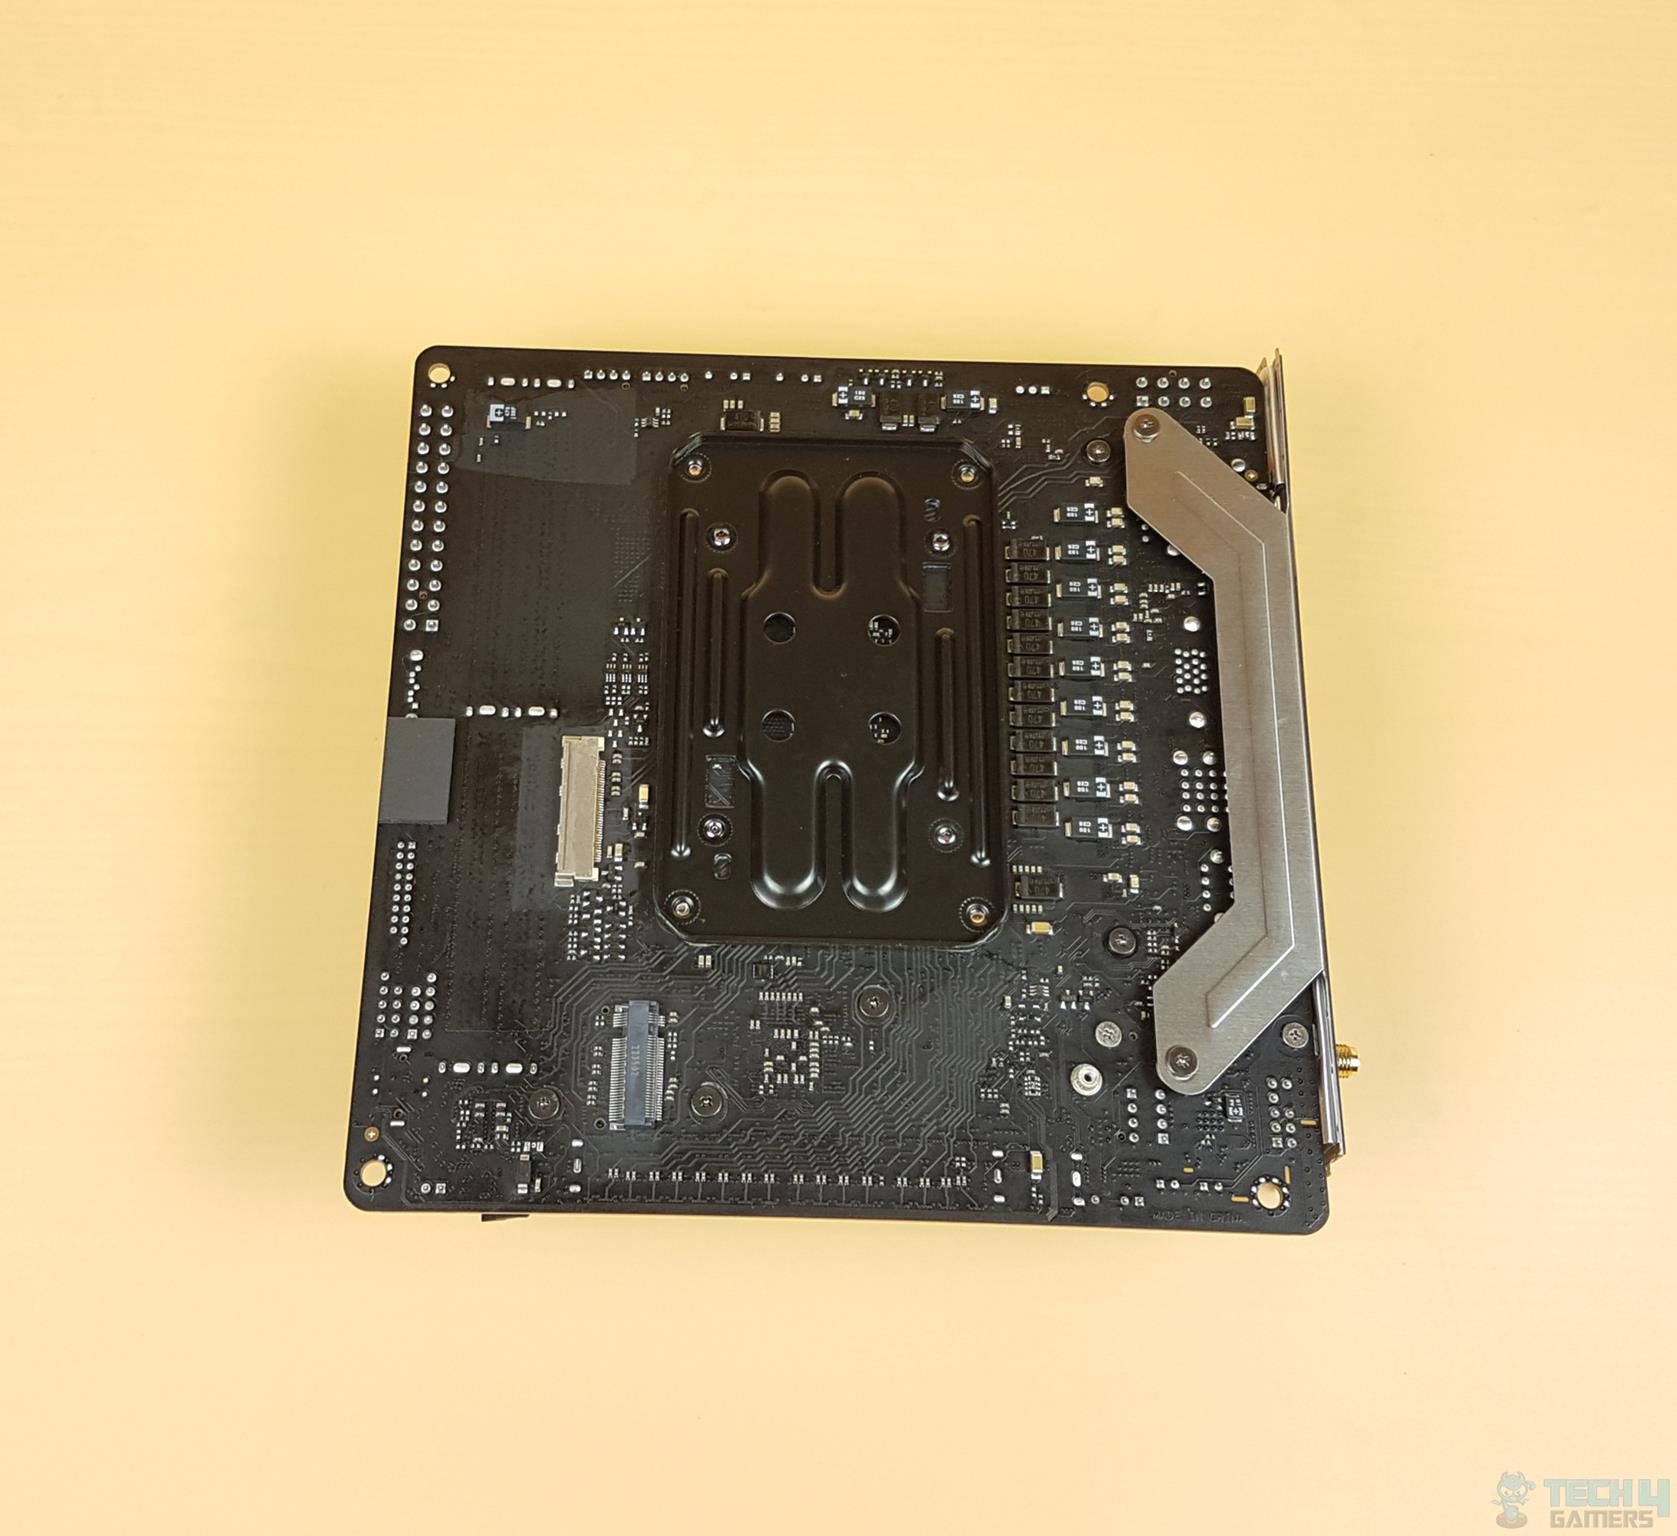 ASRock B650E PG-ITX WIFI — The backside of the motherboard